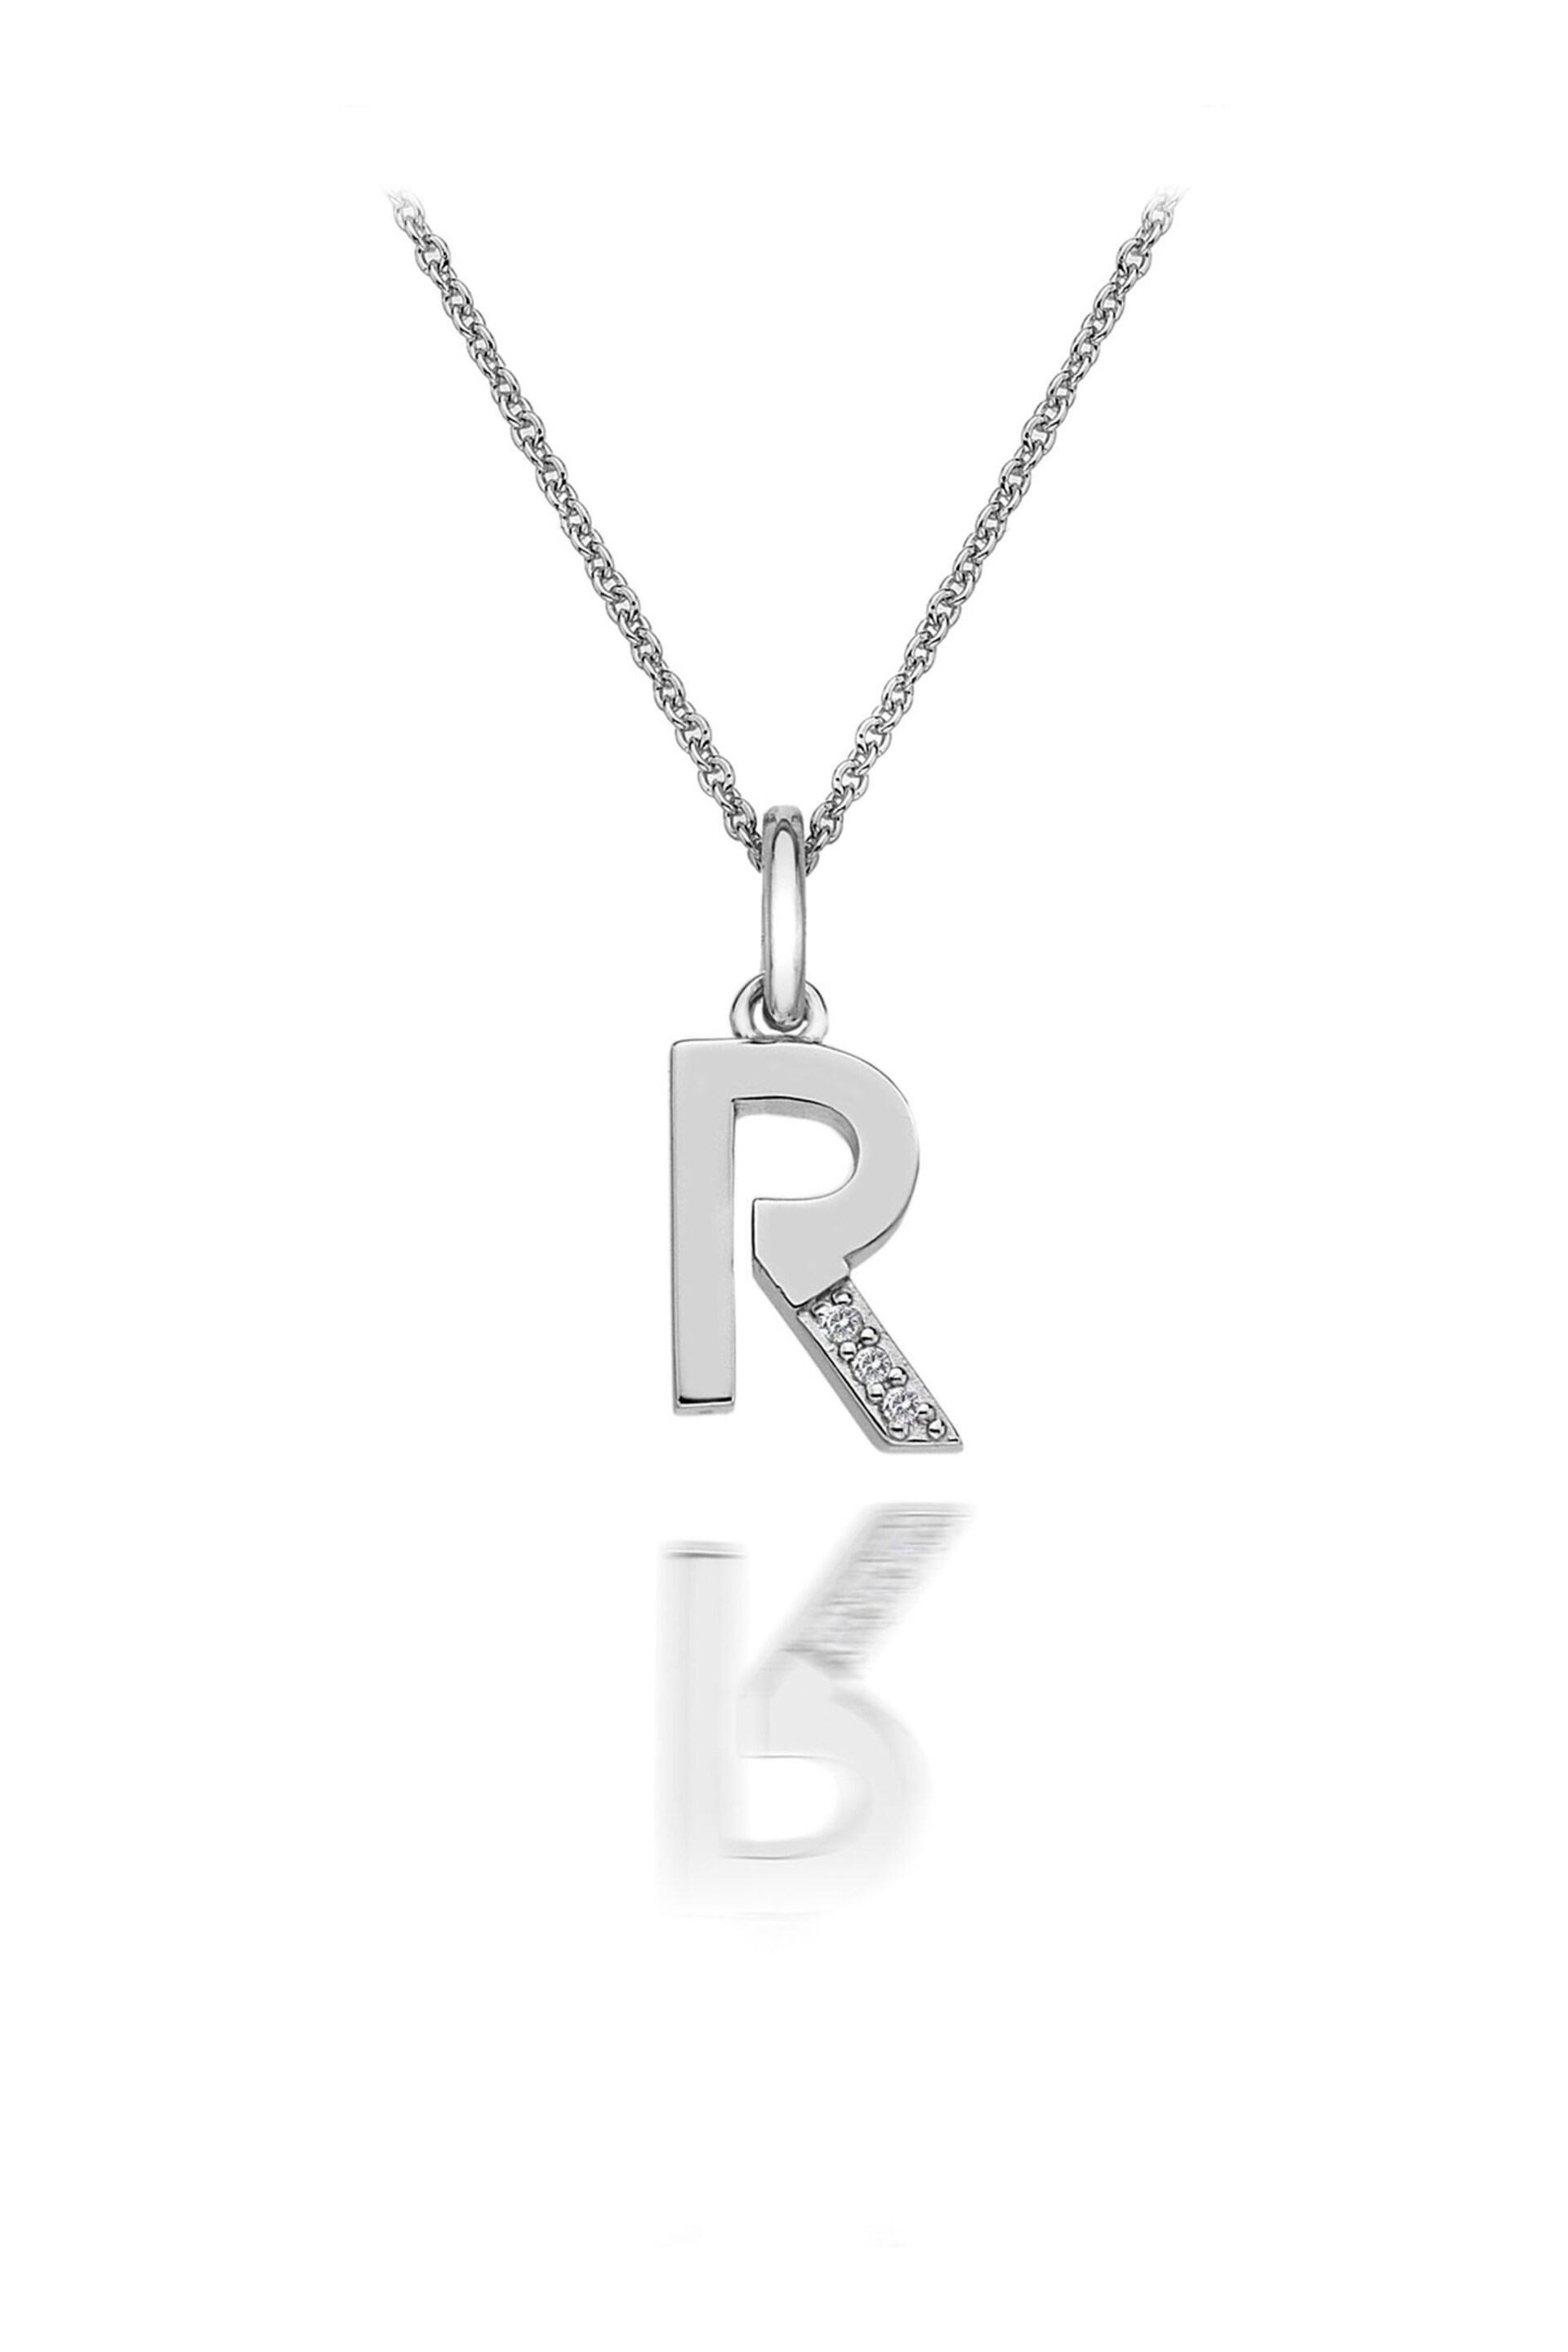 Hot Diamonds Silver Micro Initial Pendant Necklace - Image 1 of 2